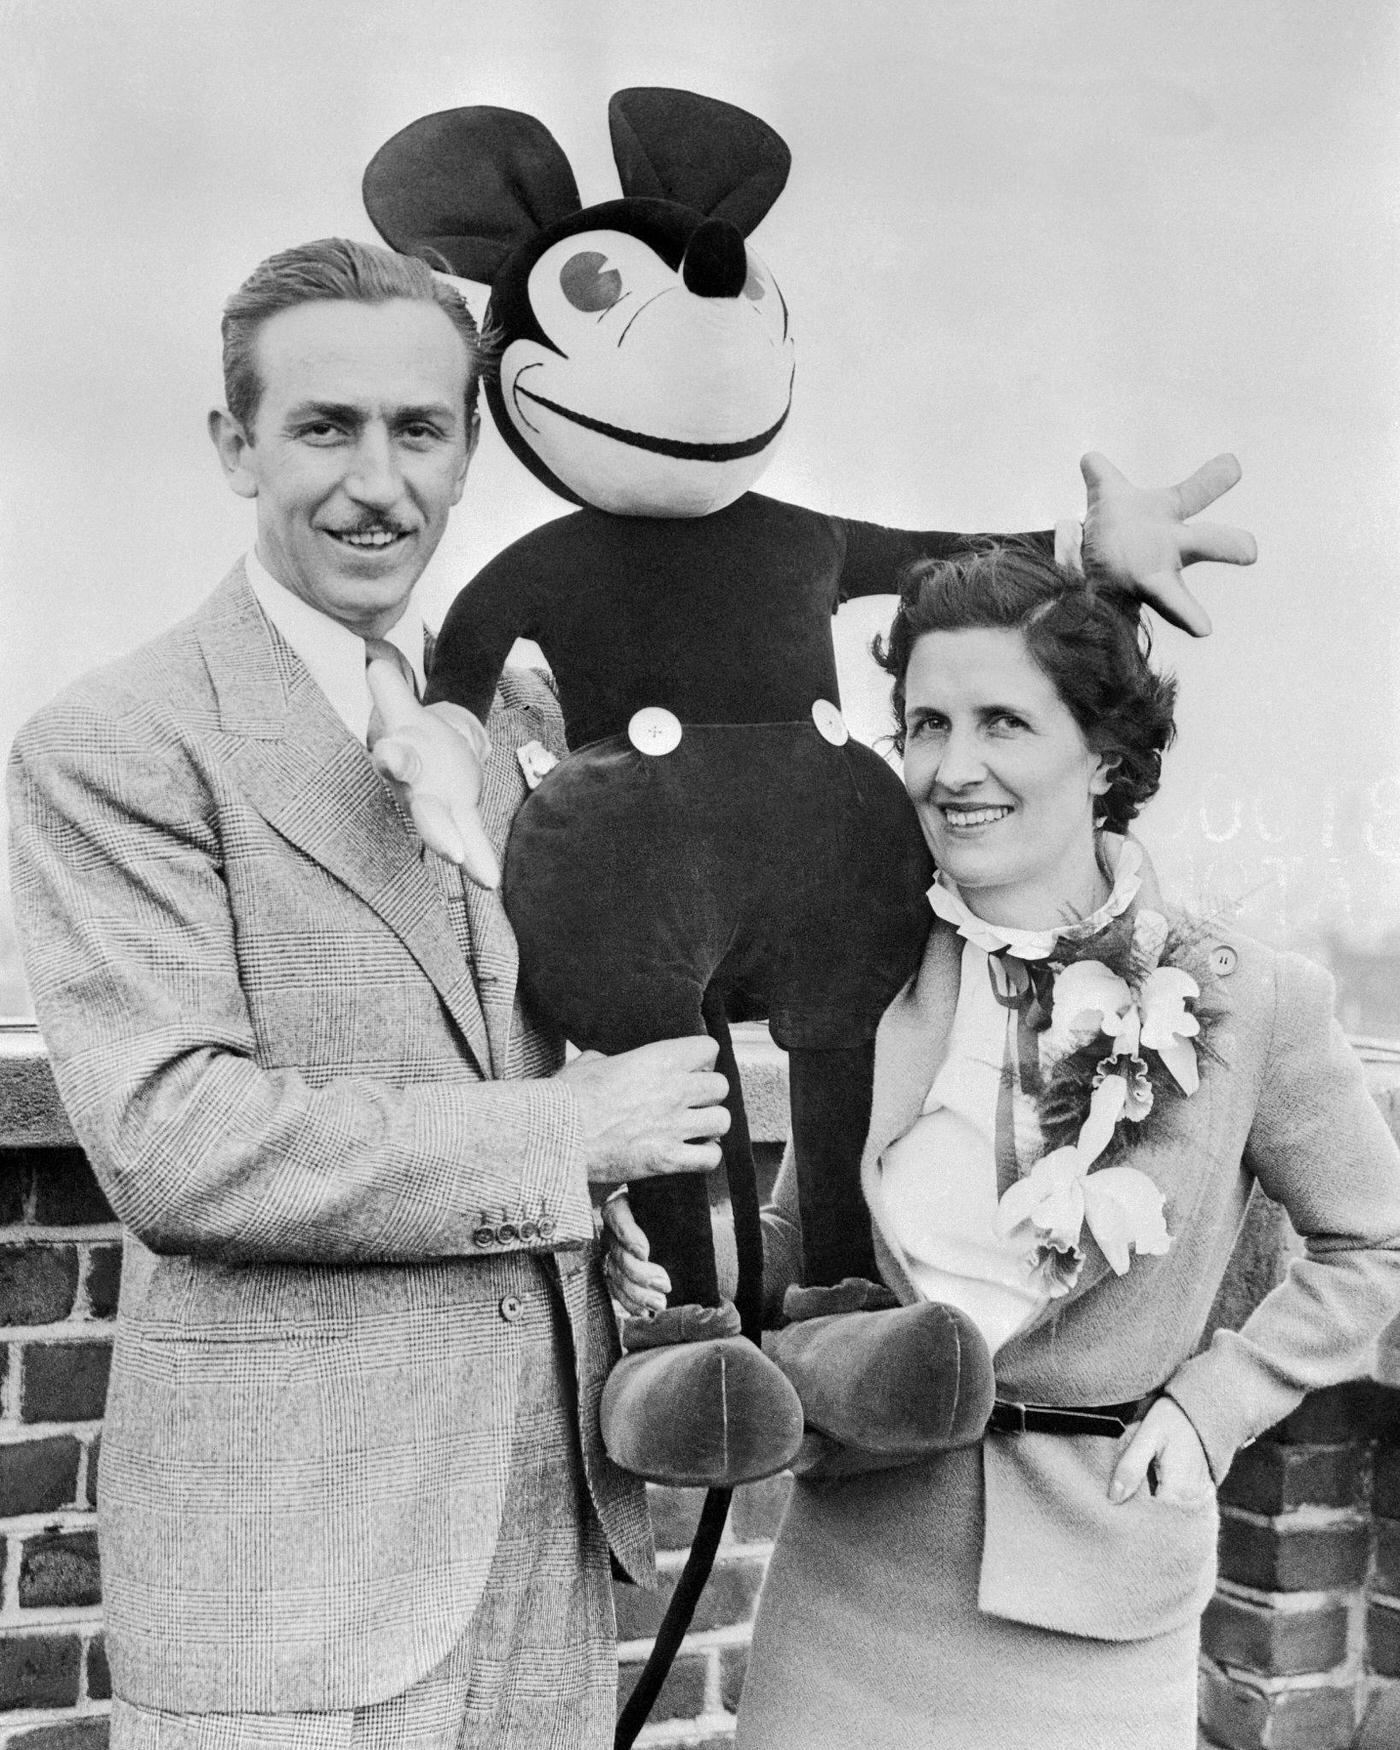 Walt and Mrs. Disney Standing with Stuffed Mickey Mouse